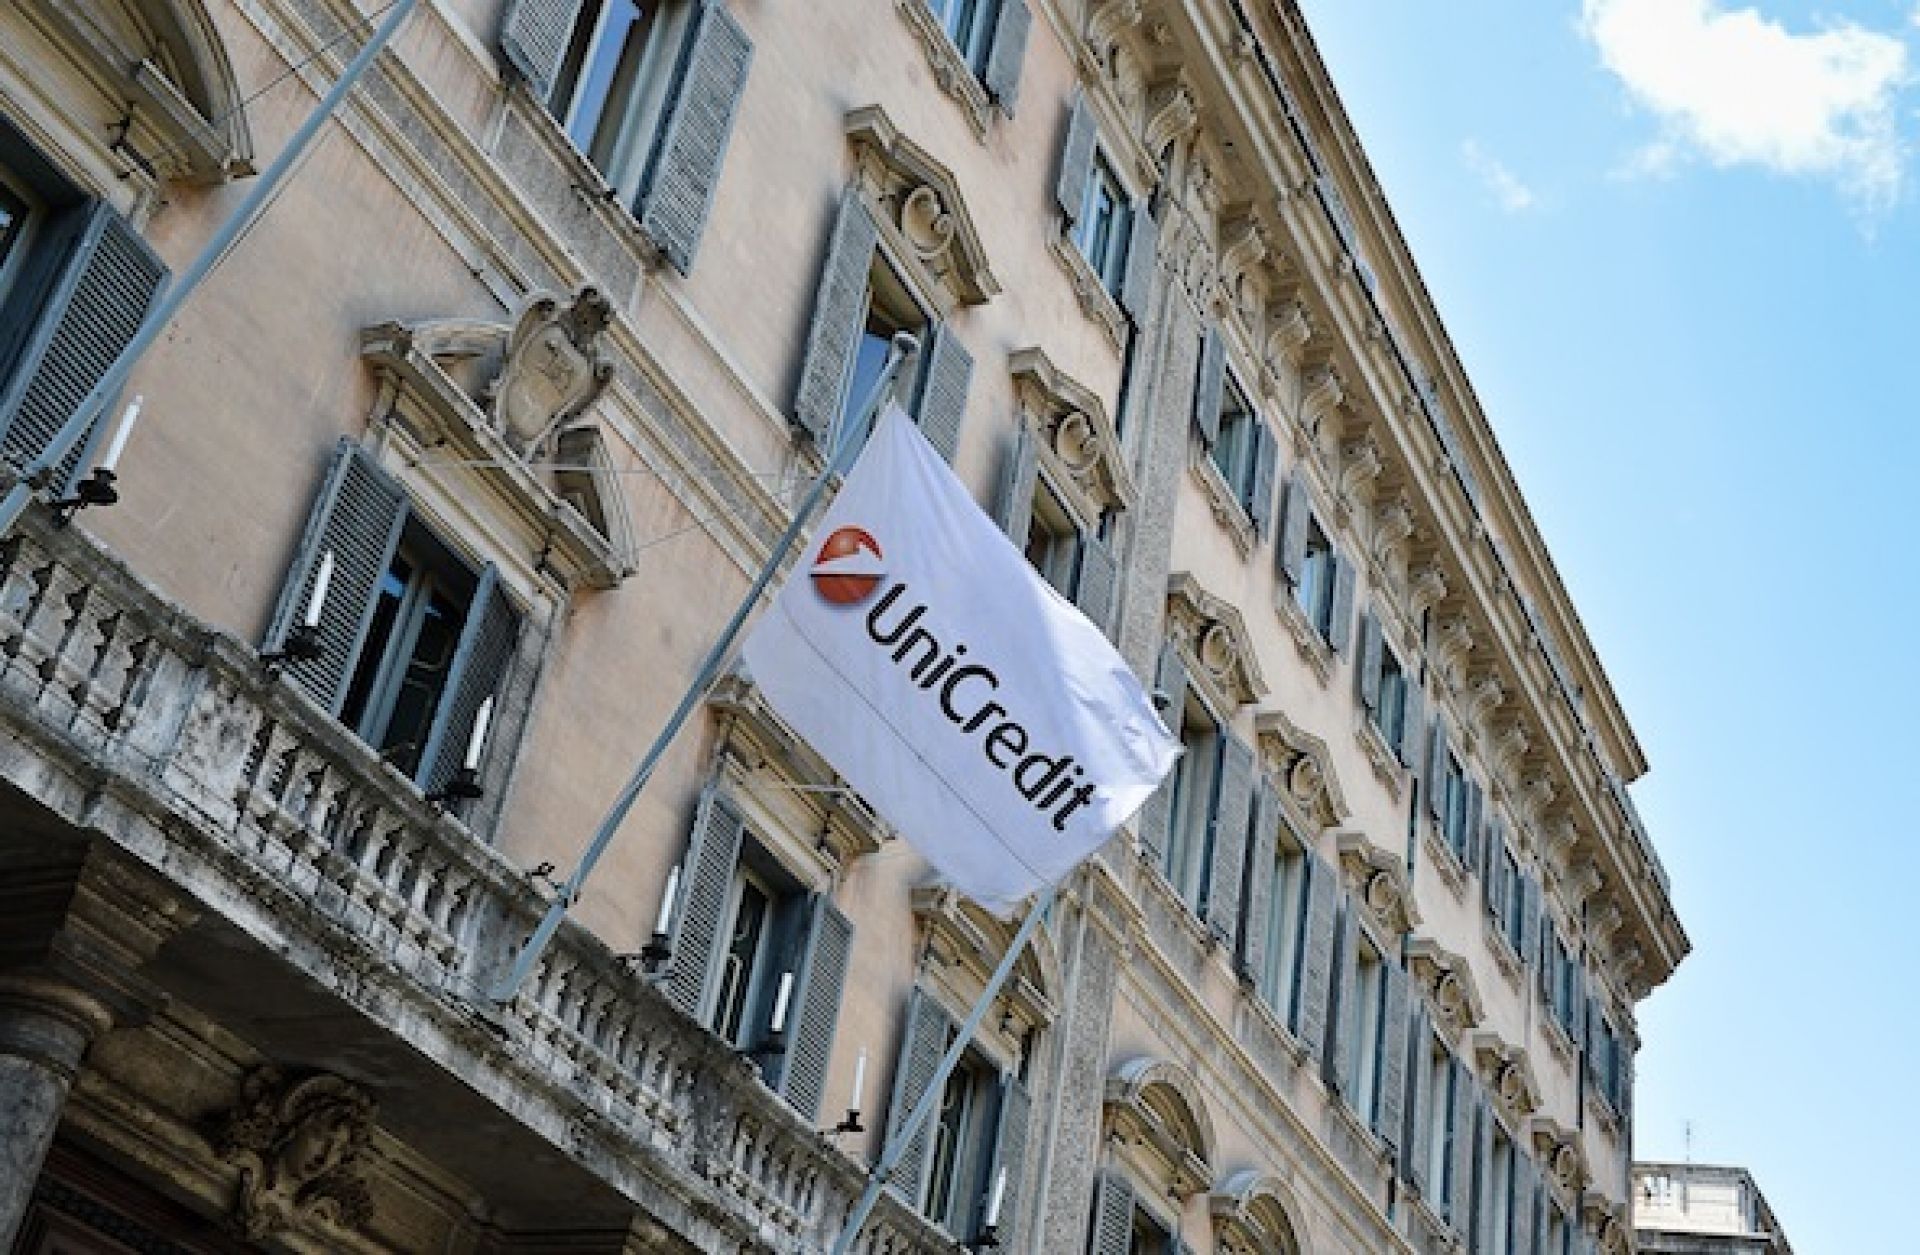  A flag bearing UniCredit's logo is shown in downtown Rome.